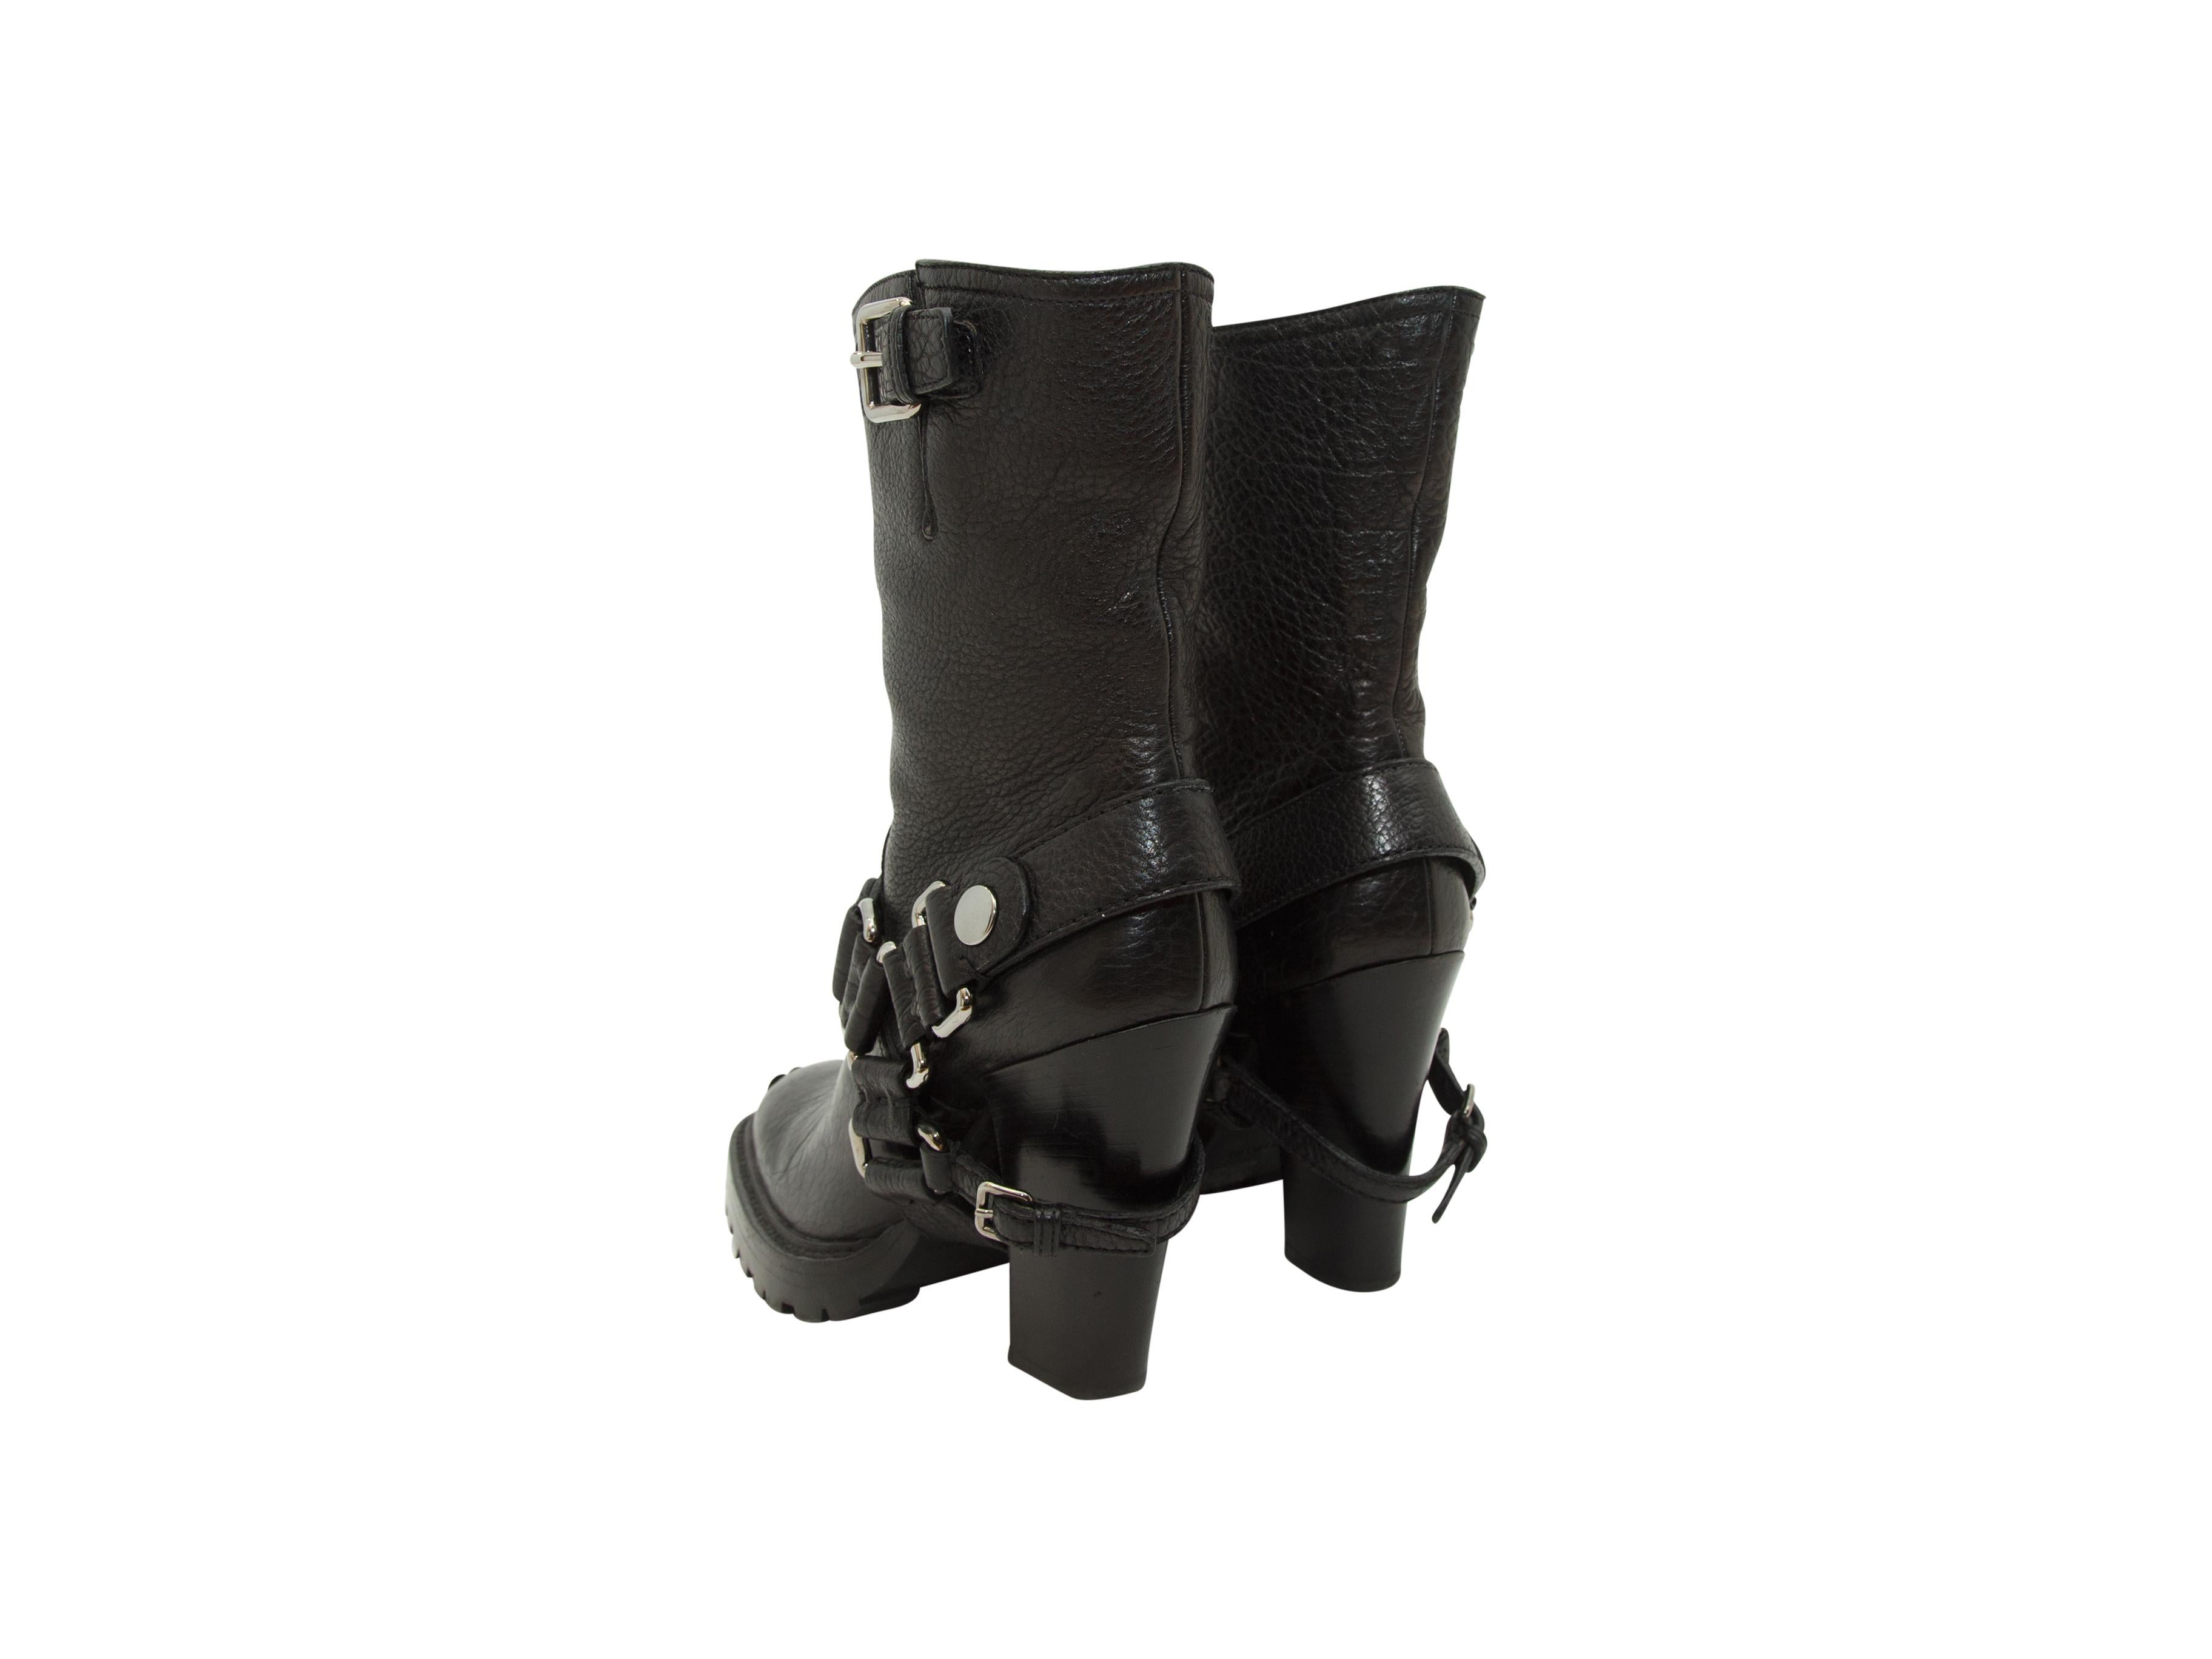 Product details:  Black leather high heel moto-style ankle boots by Miu Miu.  The black leather ankle boots have silver hardware on the toe and top of the boot, and on the black leather boot strap.  Round toe.  4.5